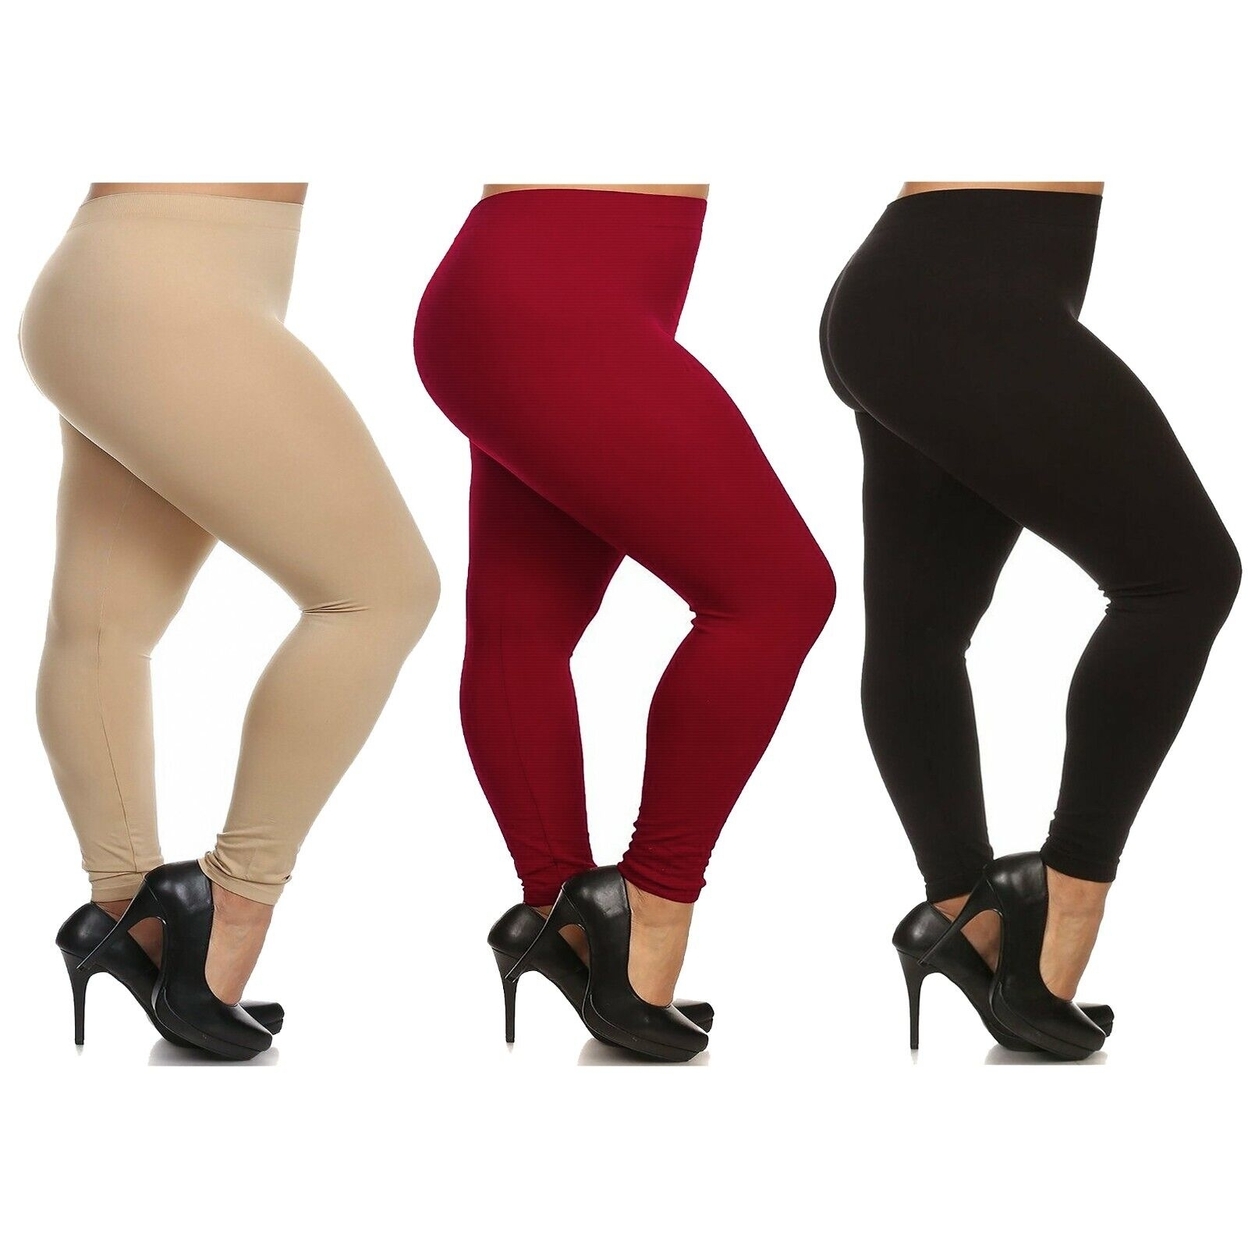 3-Pack: Women's Casual Ultra-Soft Smooth High Waisted Athletic Active Yoga Leggings Plus Size Available - Beige,black, Red, 3x